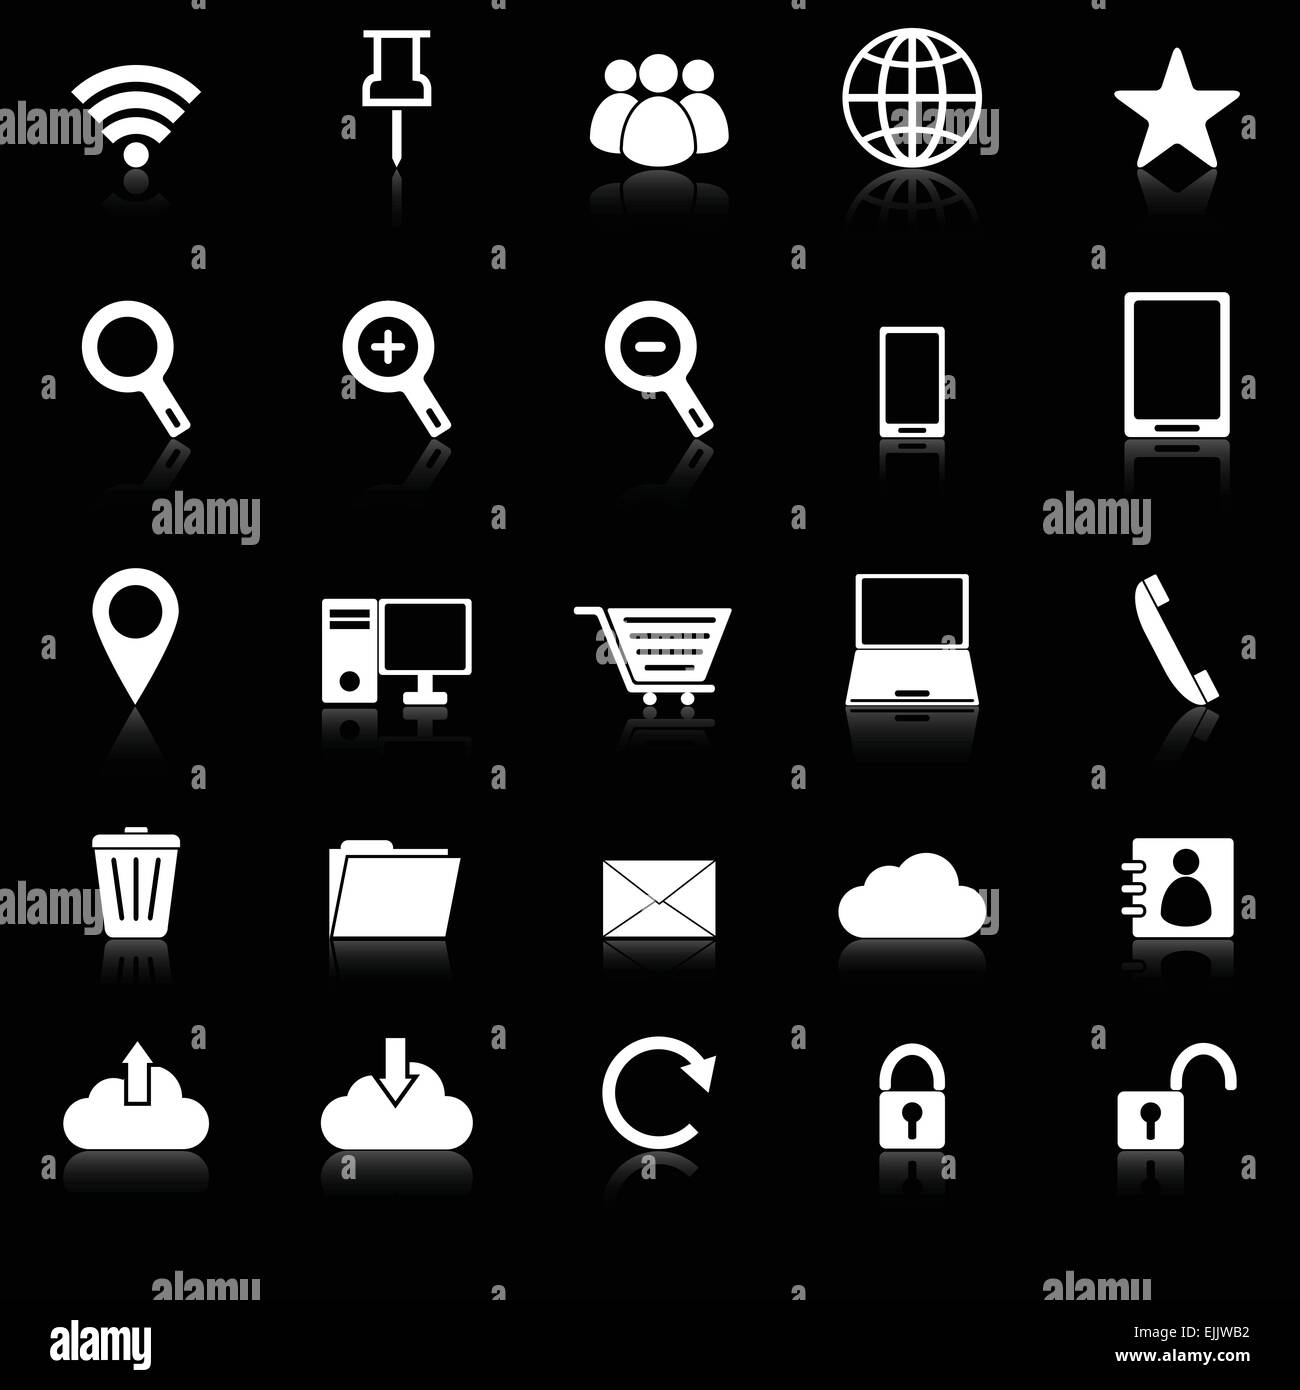 Internet icons with reflect on black background, stock vector Stock Vector